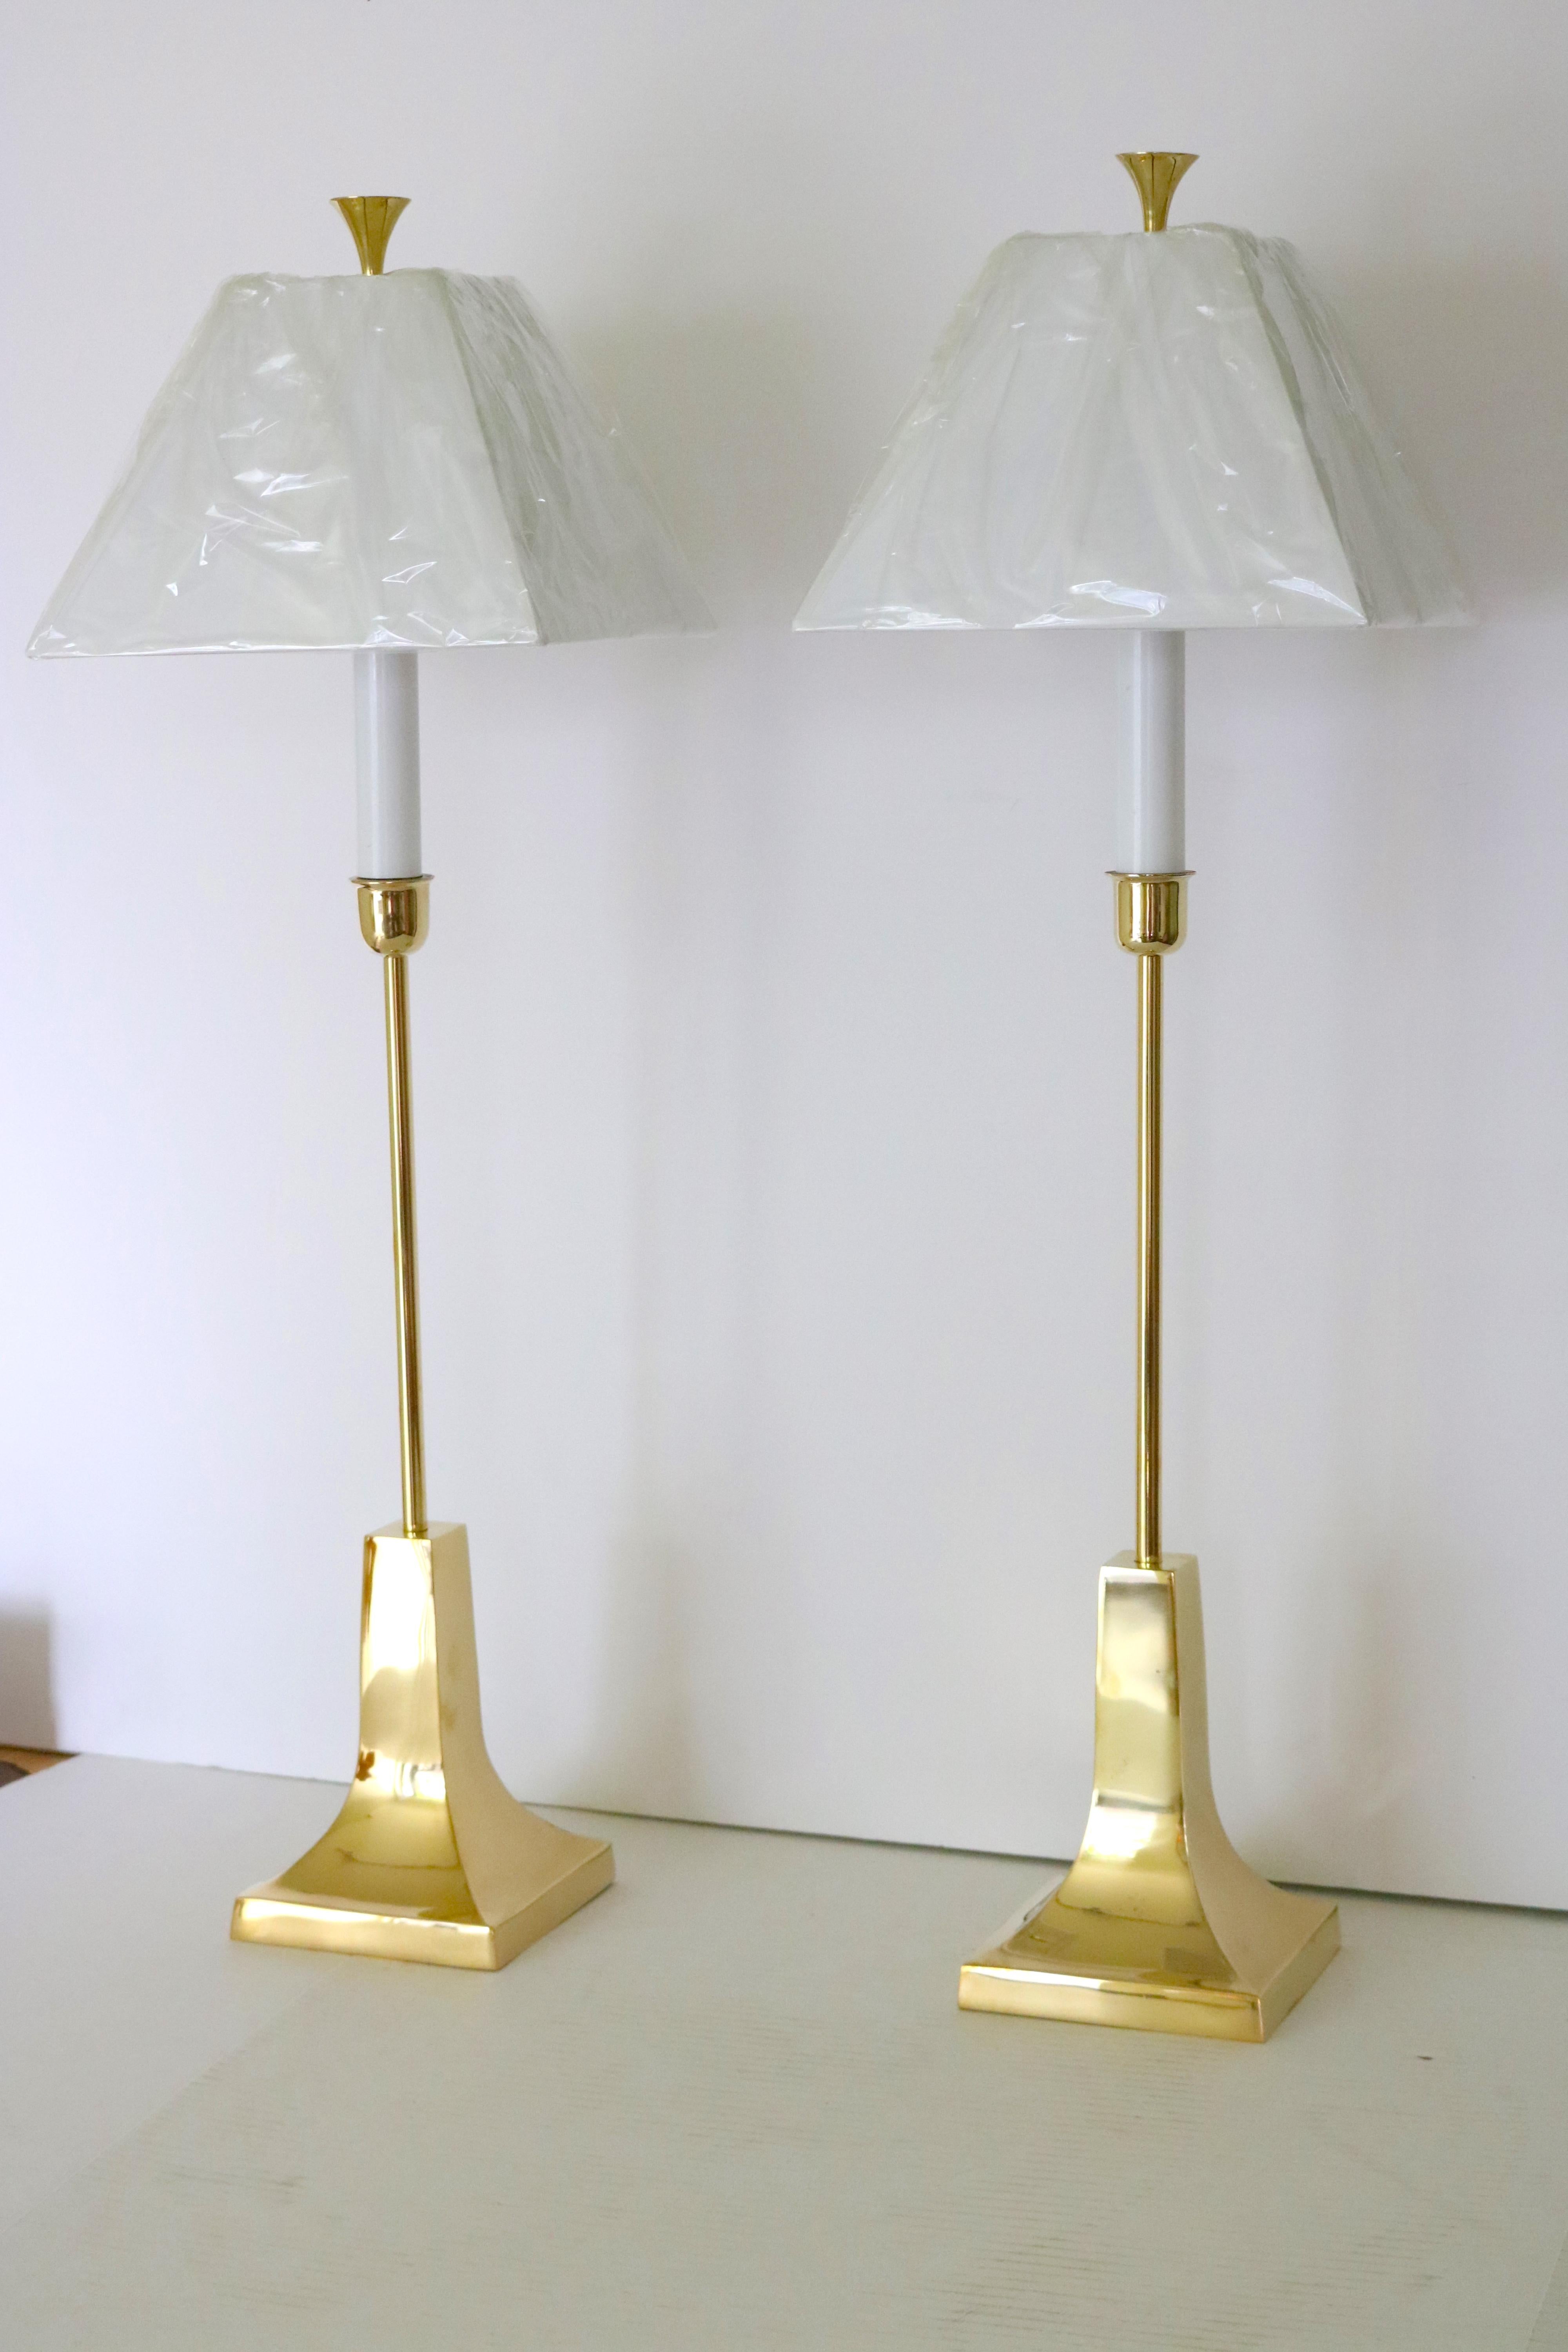 Pair of Sarreid Ltd. Mid-Century Modern, circa 1980s elegant tall polished candlestick brass lamps on square, fluted bases with slender brass tube body and circular flat top finials. Included are, exact as original design, new white shades( still in